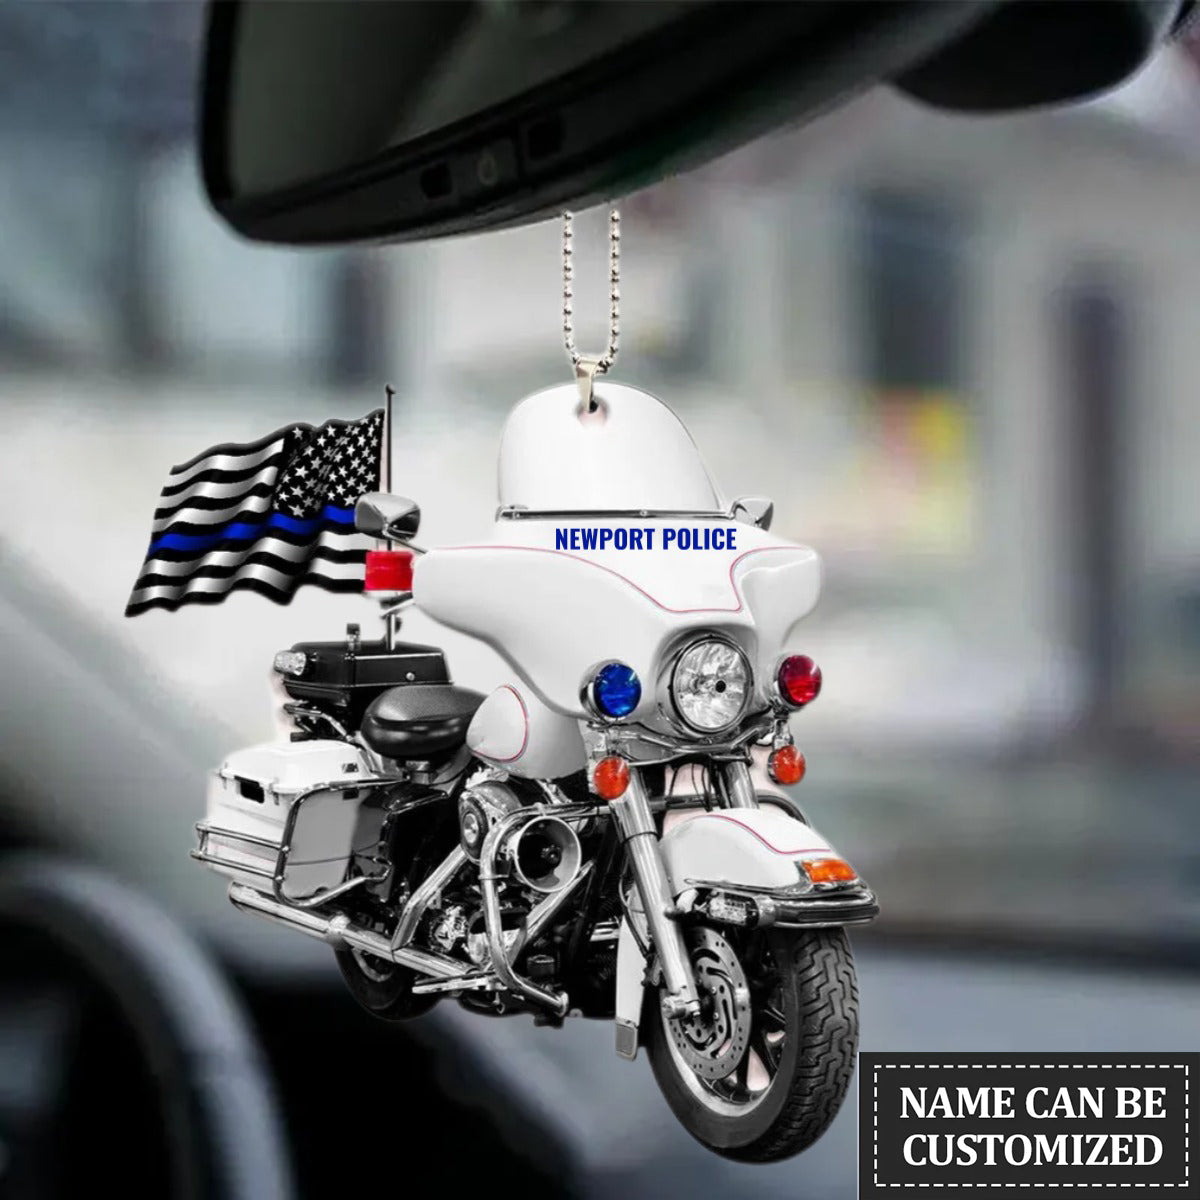 Police motorcycle Personalized Flat Car Ornament